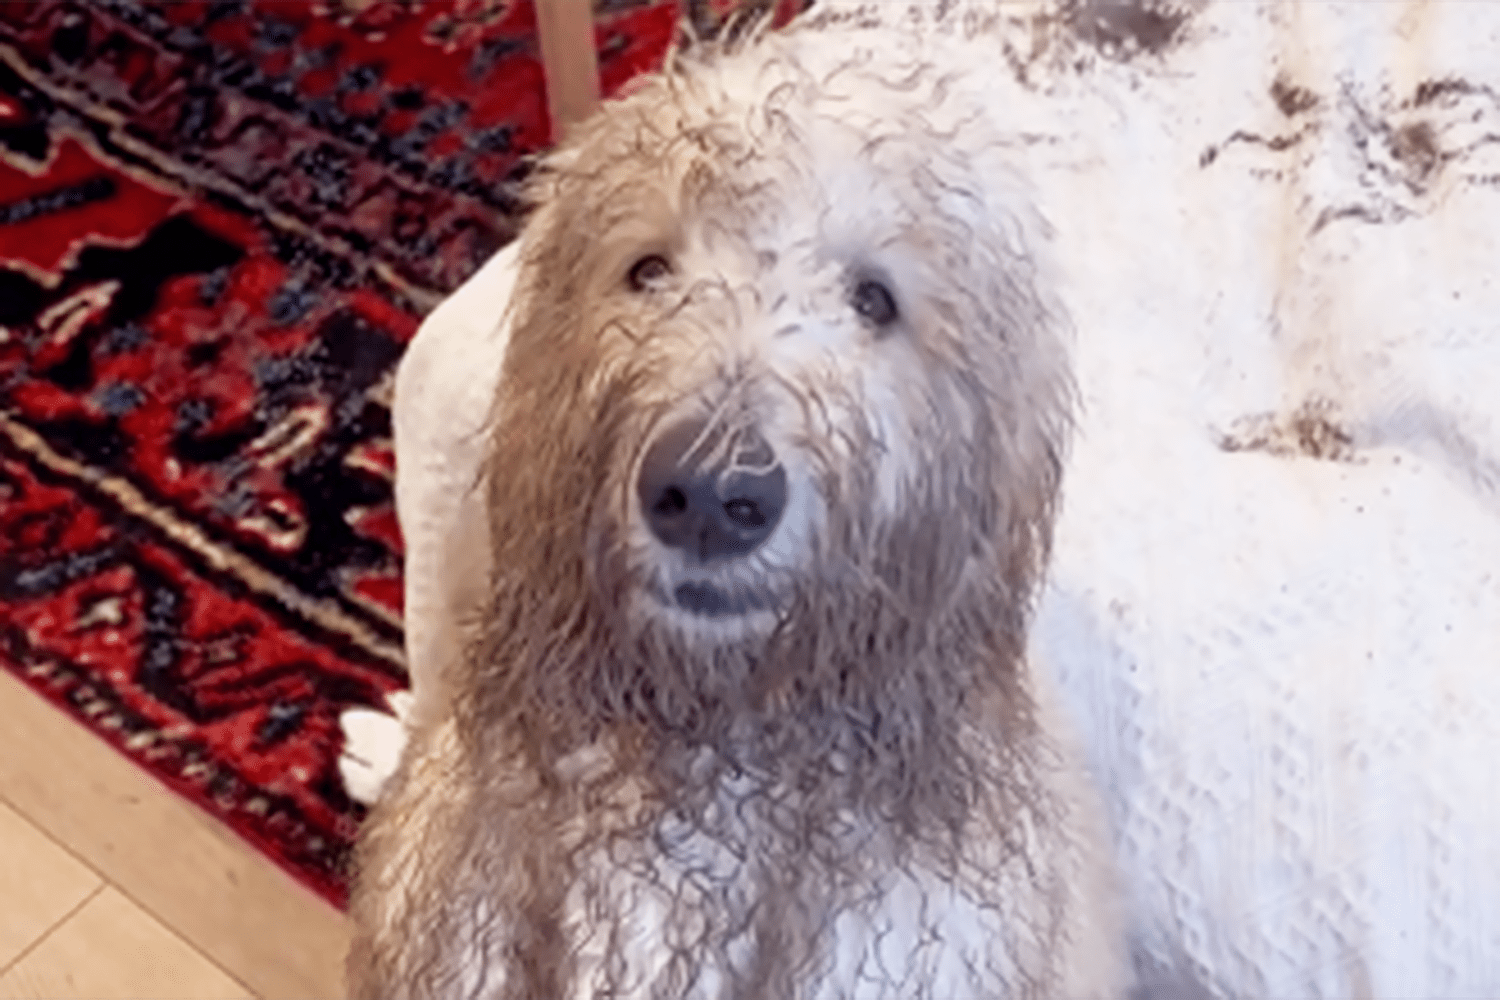 Goldendoodle Dirties Couch With Muddy Zoomies in Viral TikTok | Daily Paws